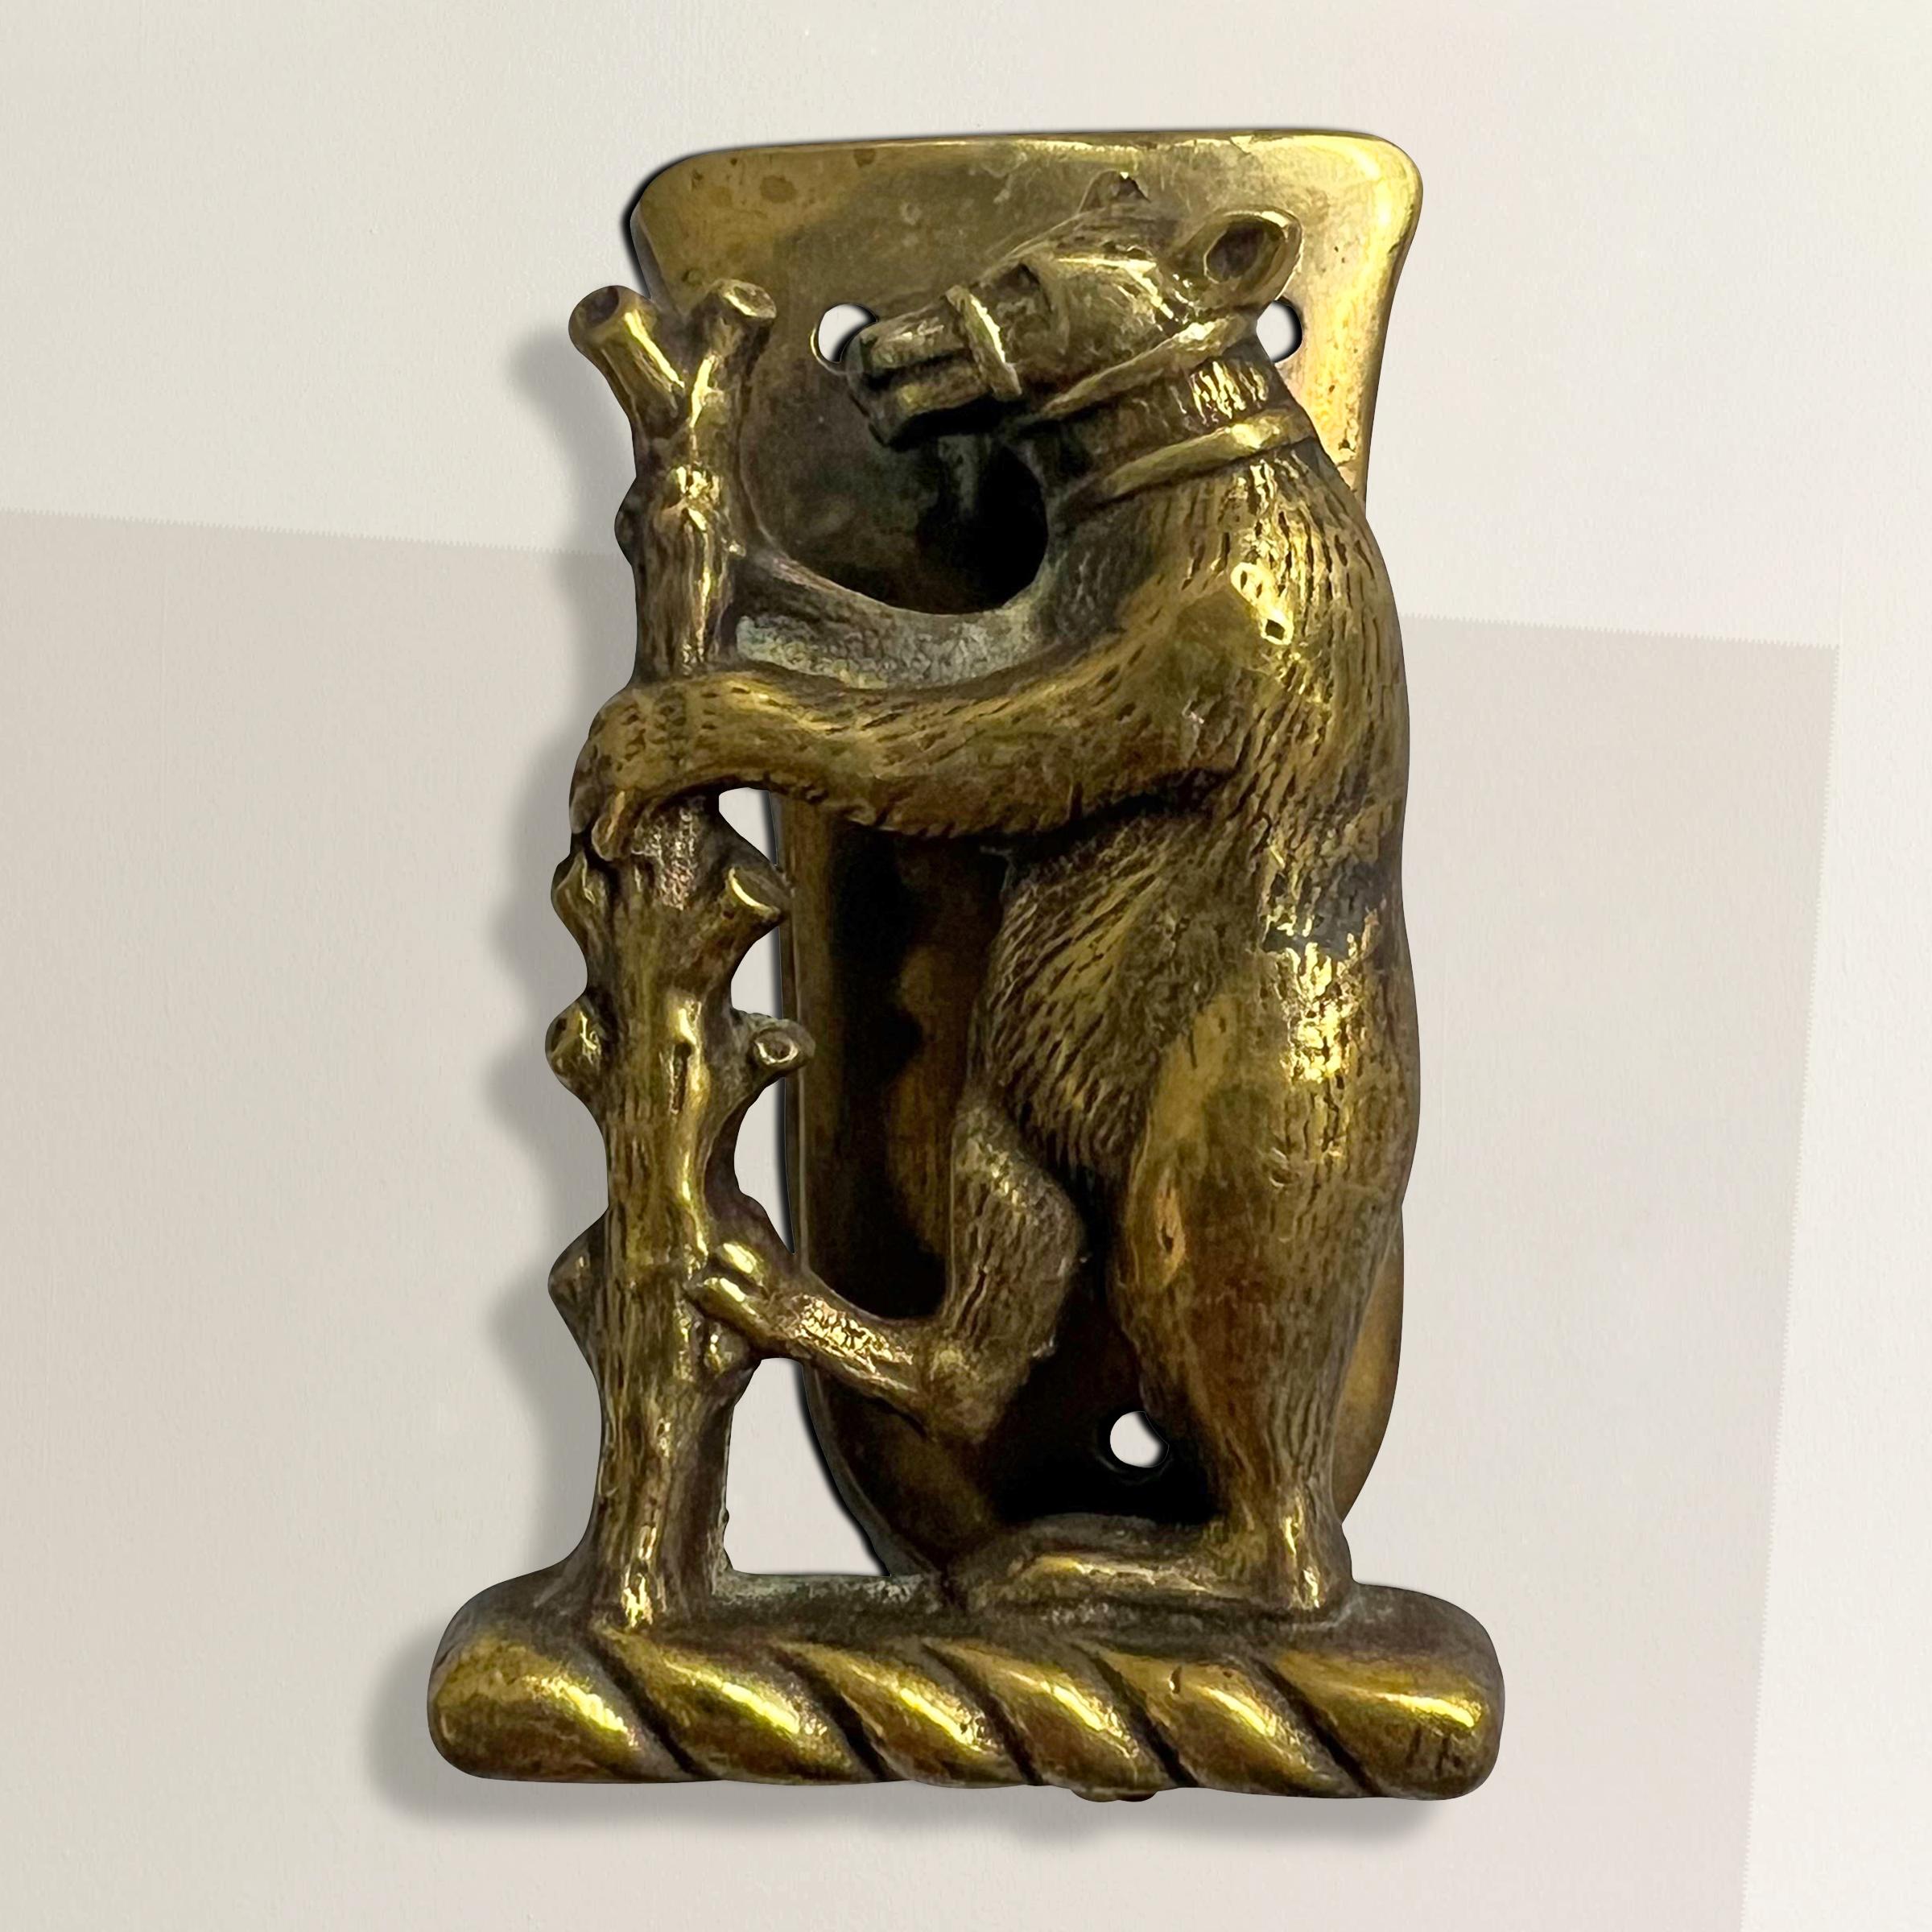 This late 19-century English brass door knocker is a delightful relic of the grand country houses of its era. Small in scale because it was designed for interior doors, it was intended to add a touch of whimsy and charm to guest rooms and bathrooms.